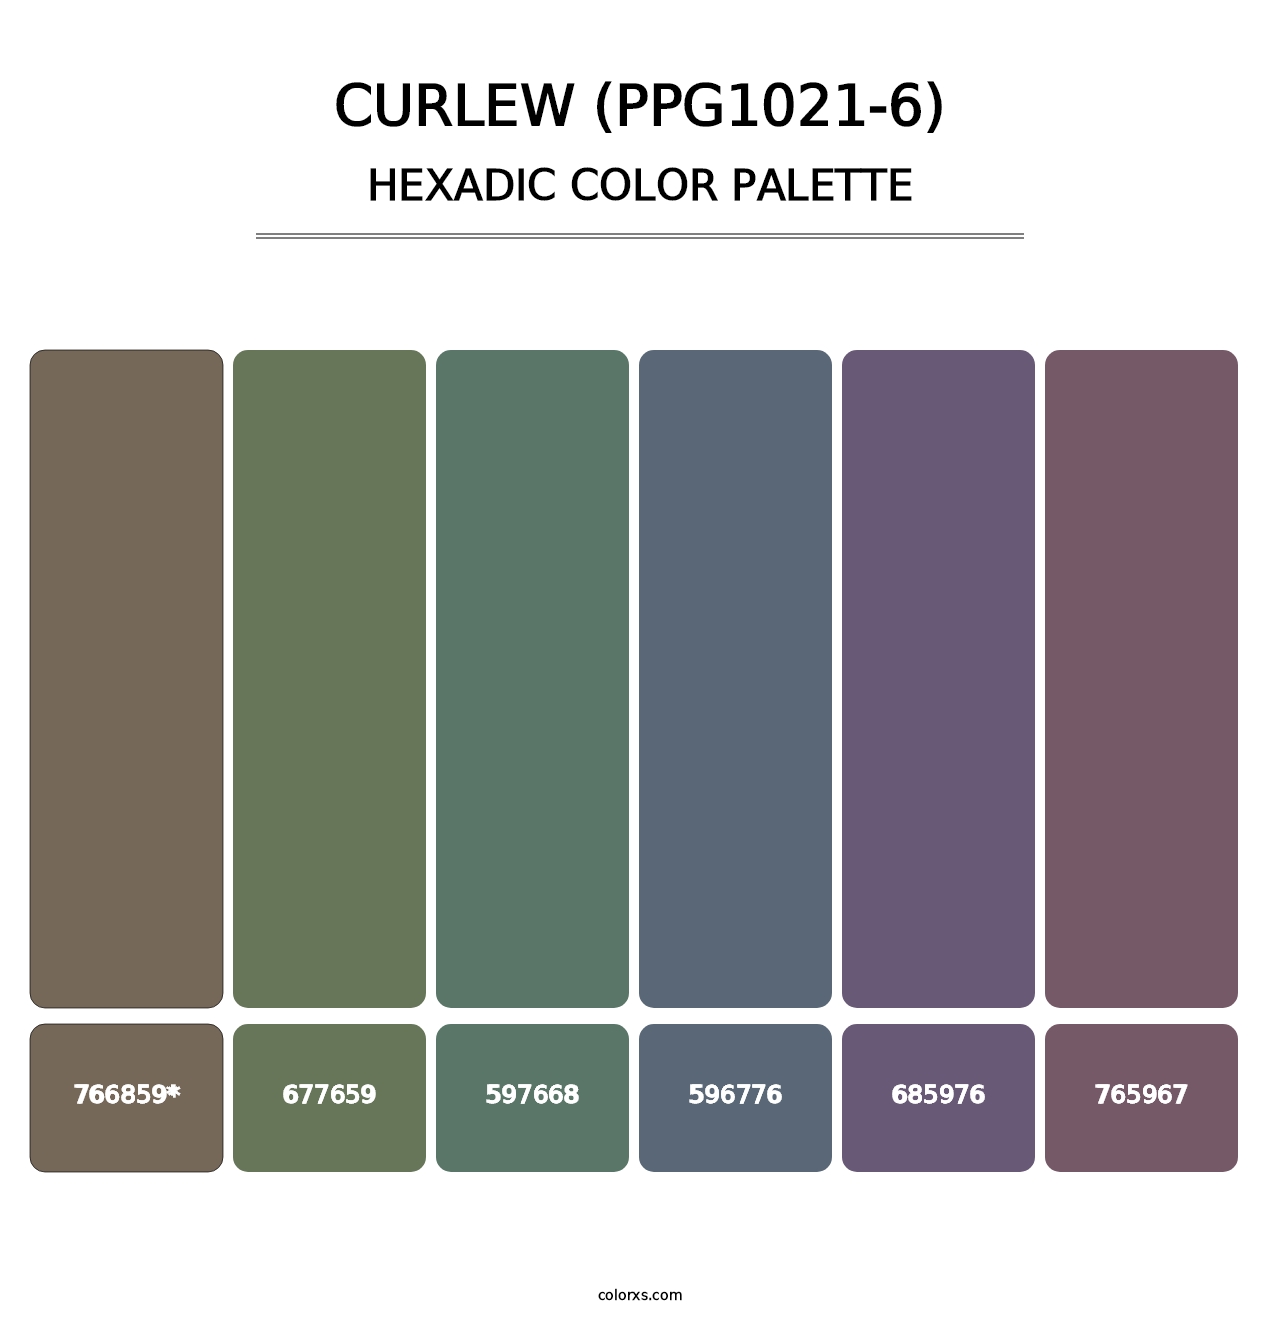 Curlew (PPG1021-6) - Hexadic Color Palette